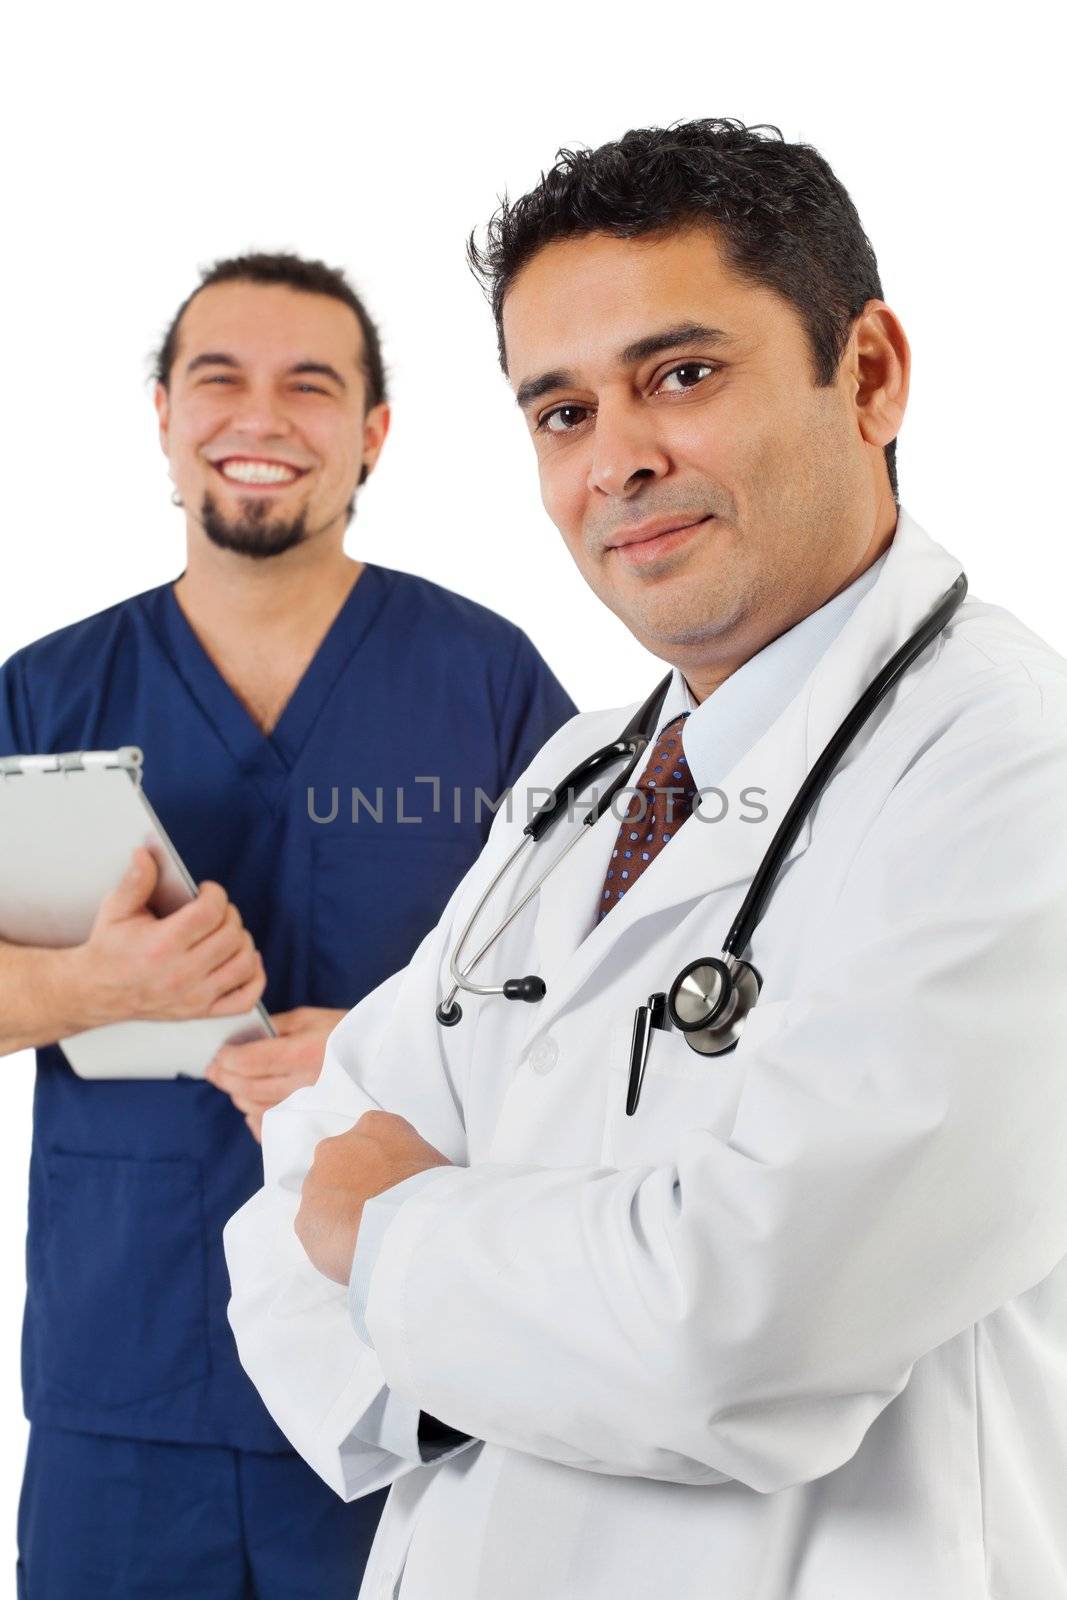 Photo of confident Indian doctor standing with male nurse in background. Focus is on doctor on right.